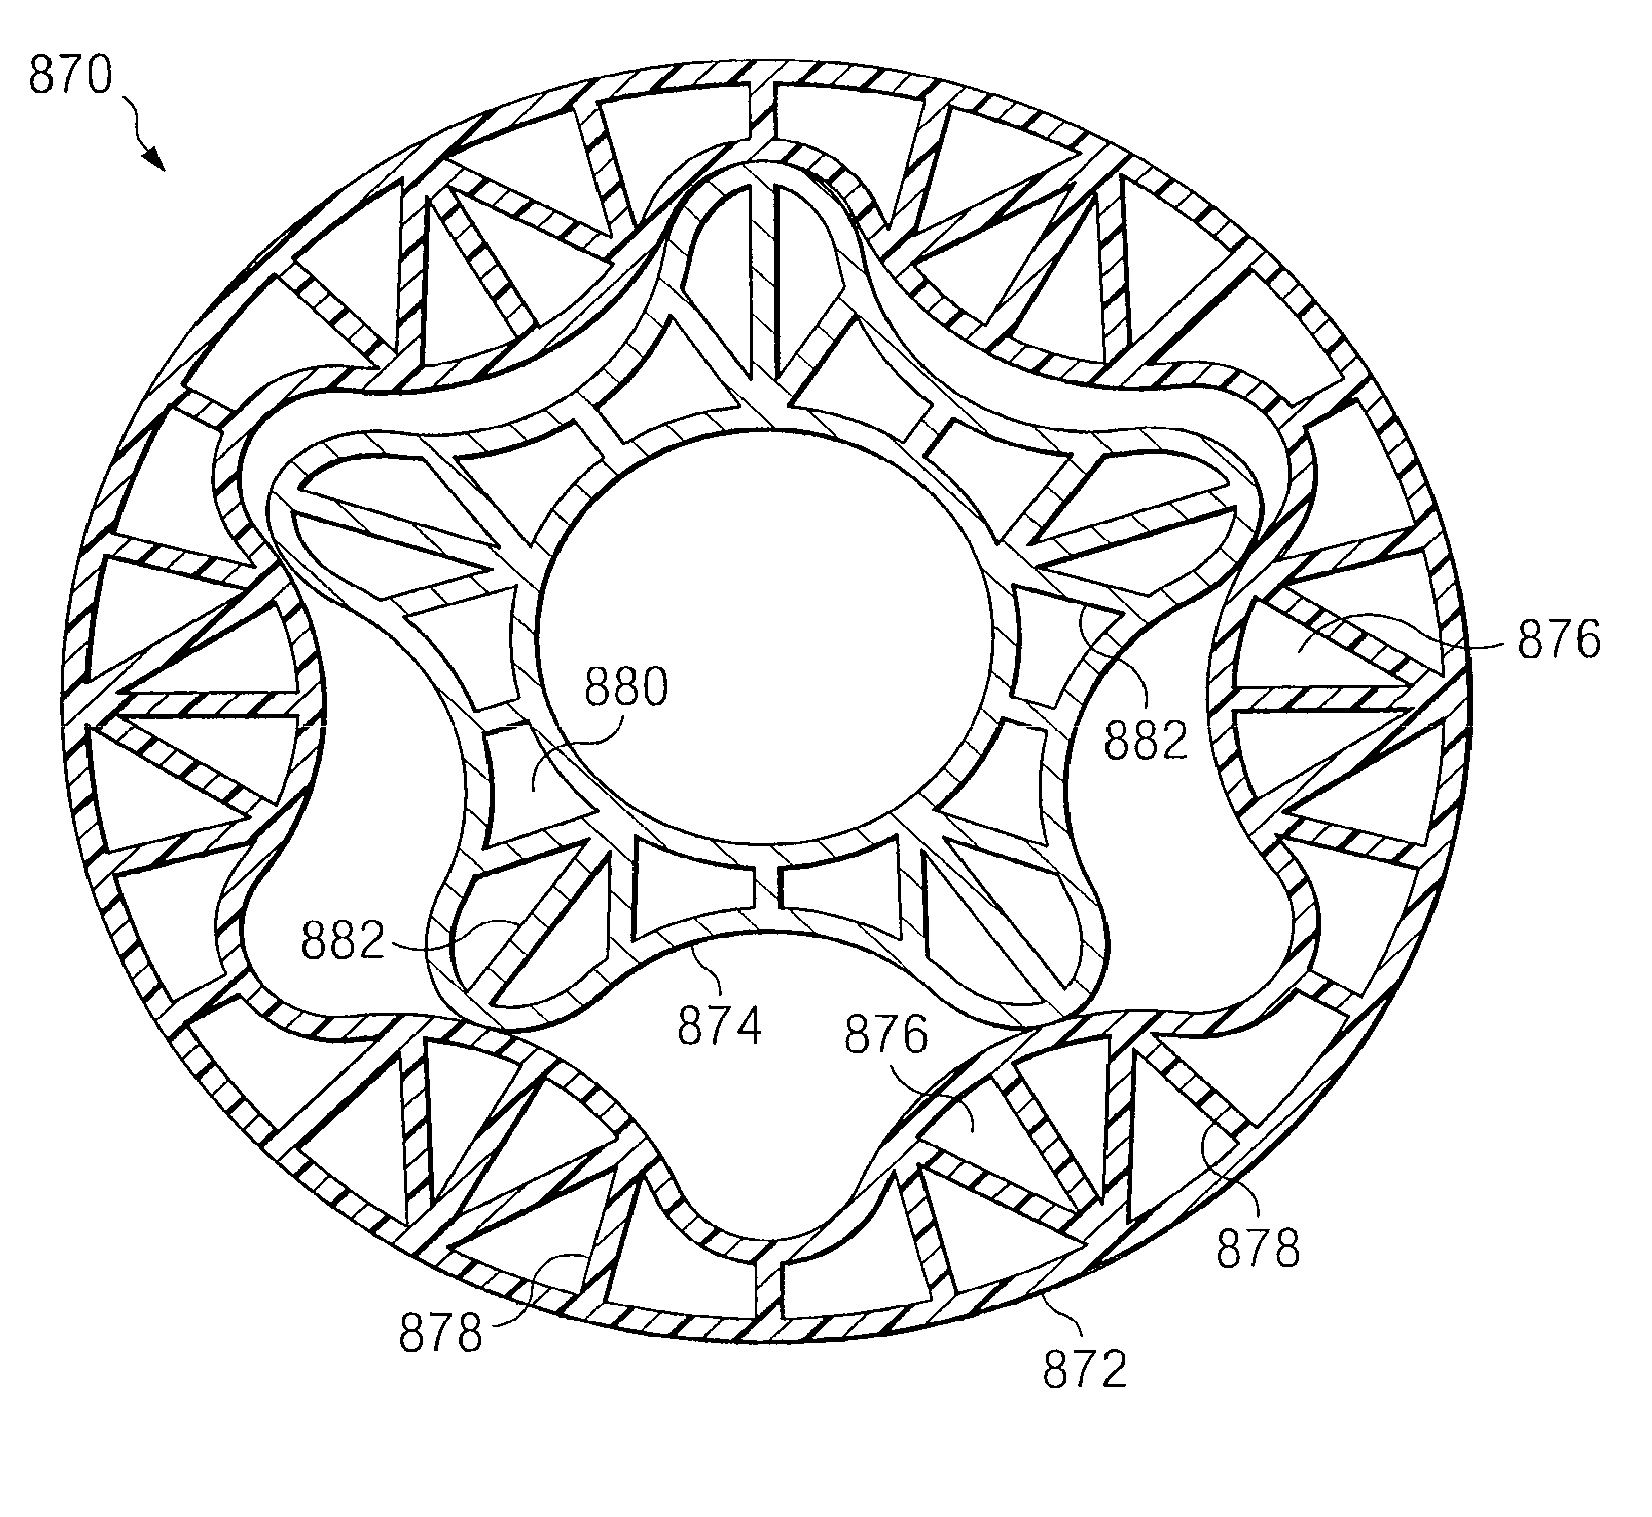 Gerotor apparatus for a quasi-isothermal Brayton cycle engine